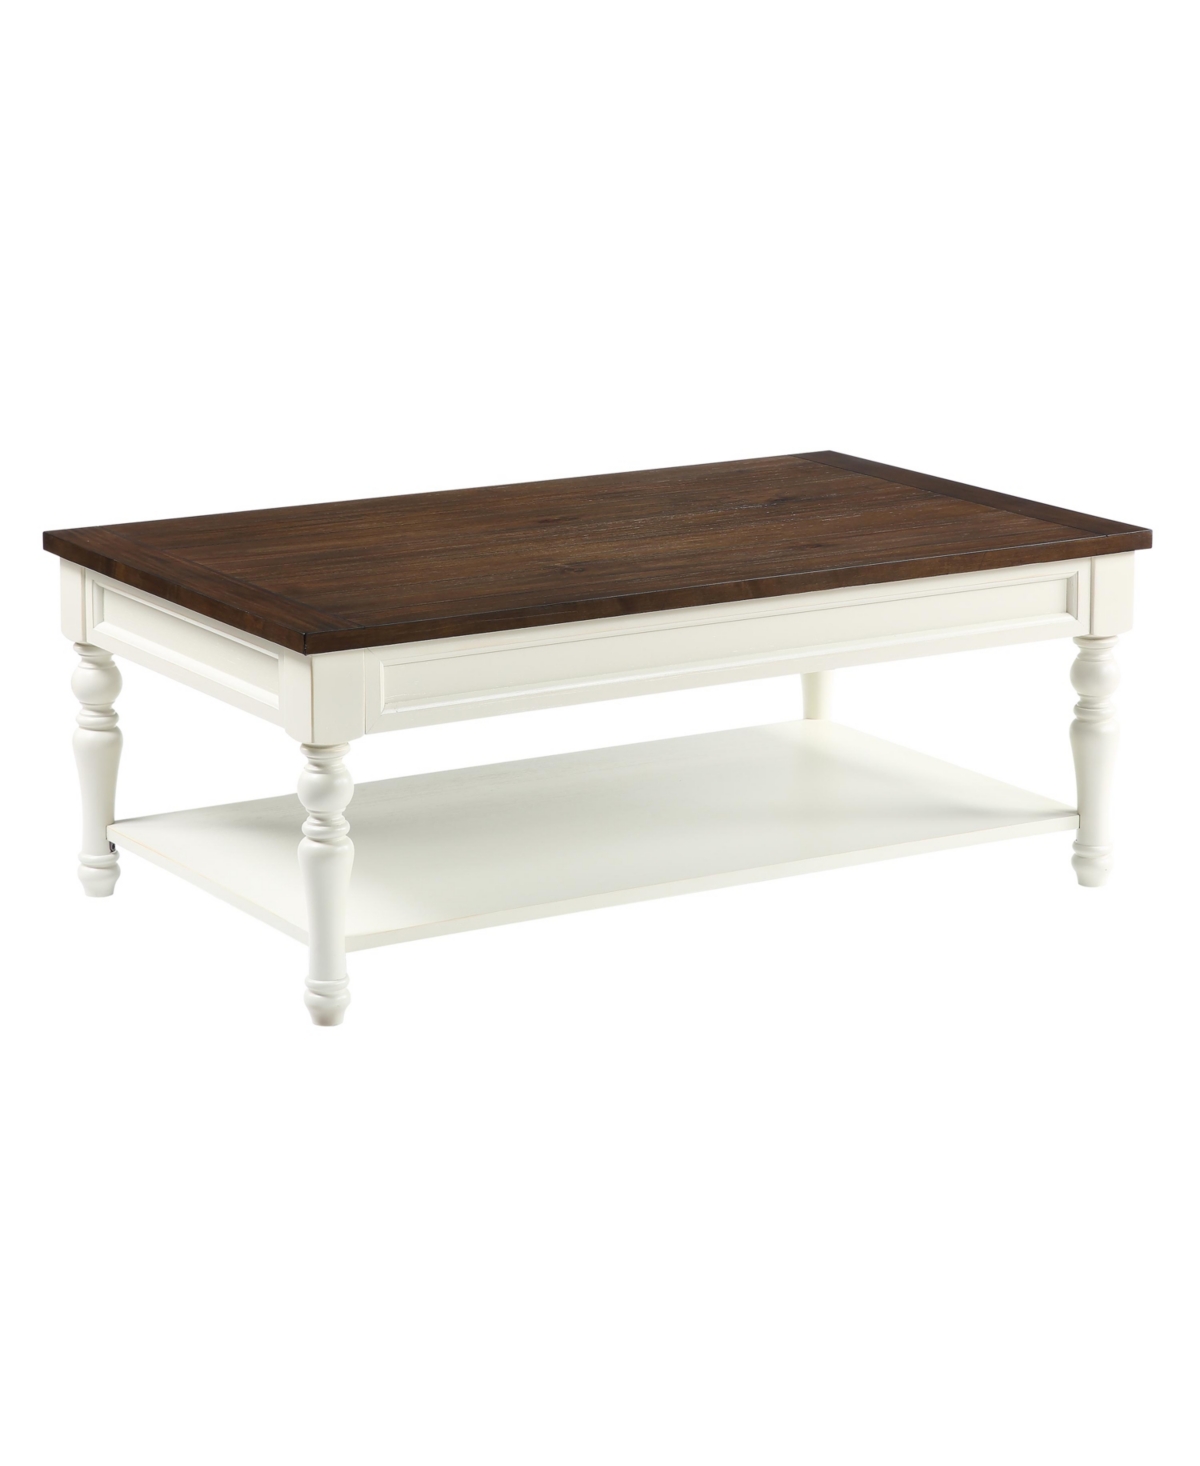 Steve Silver Joanna 48" Wooden Coffee Table In Ivory And Mocha